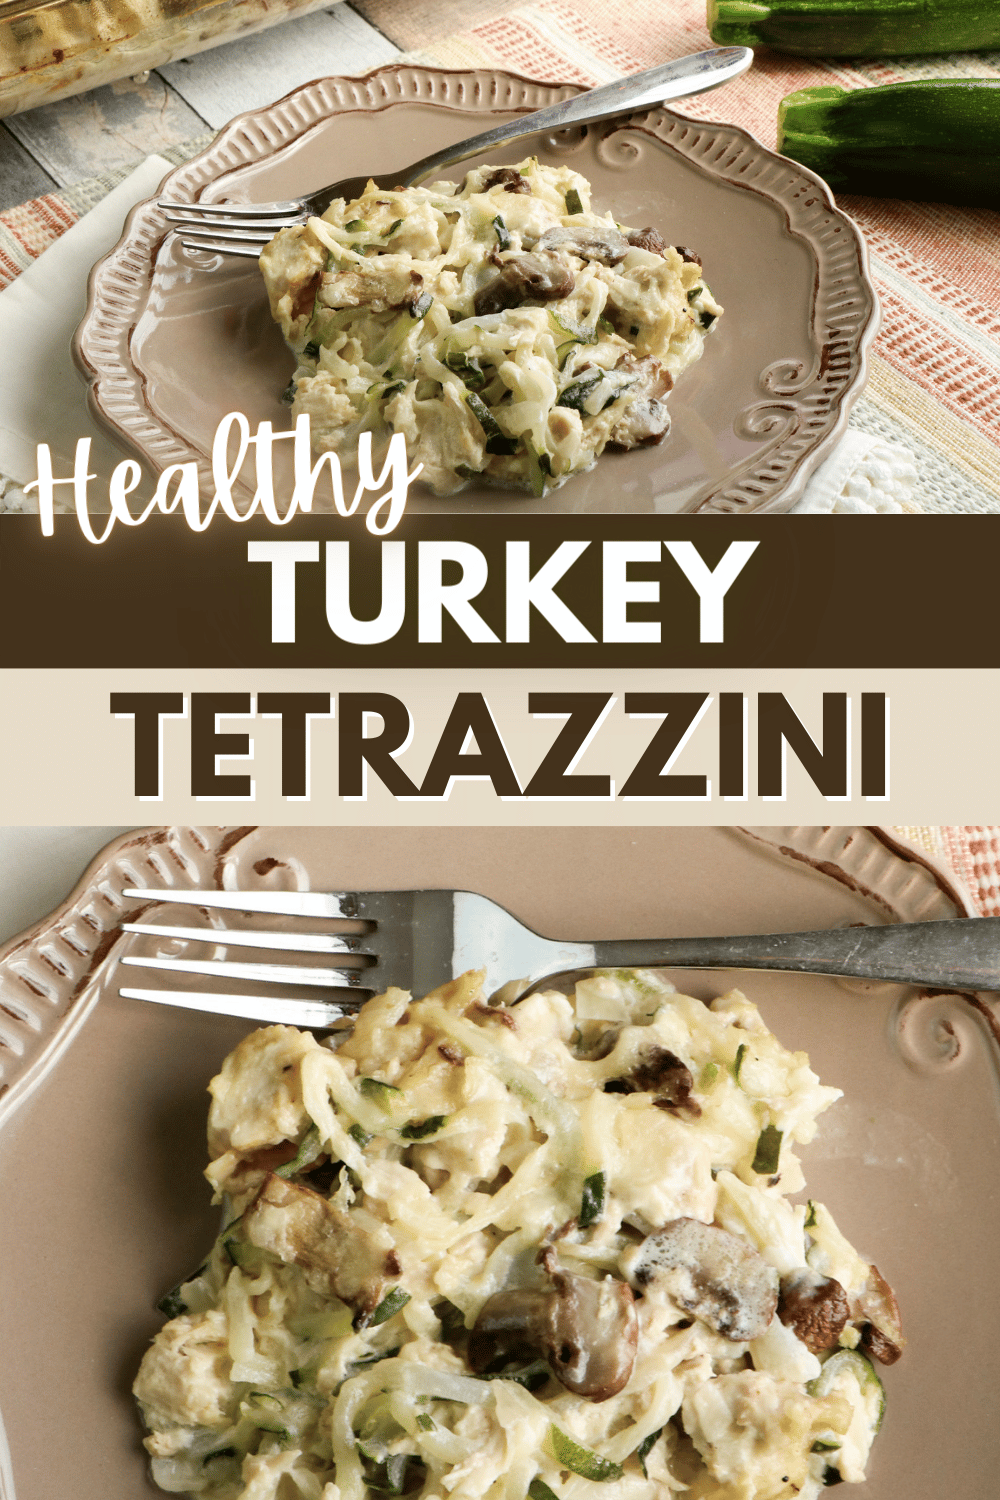 This Healthy Turkey Tetrazzini is a lightened-up version of the classic dish. It’s made with turkey, zoodles, and a Parmesan cheese sauce. #healthyturkeytetrazzini #healthyfood #healthyeating #turkeytetrazzini #zoodles via @wondermomwannab